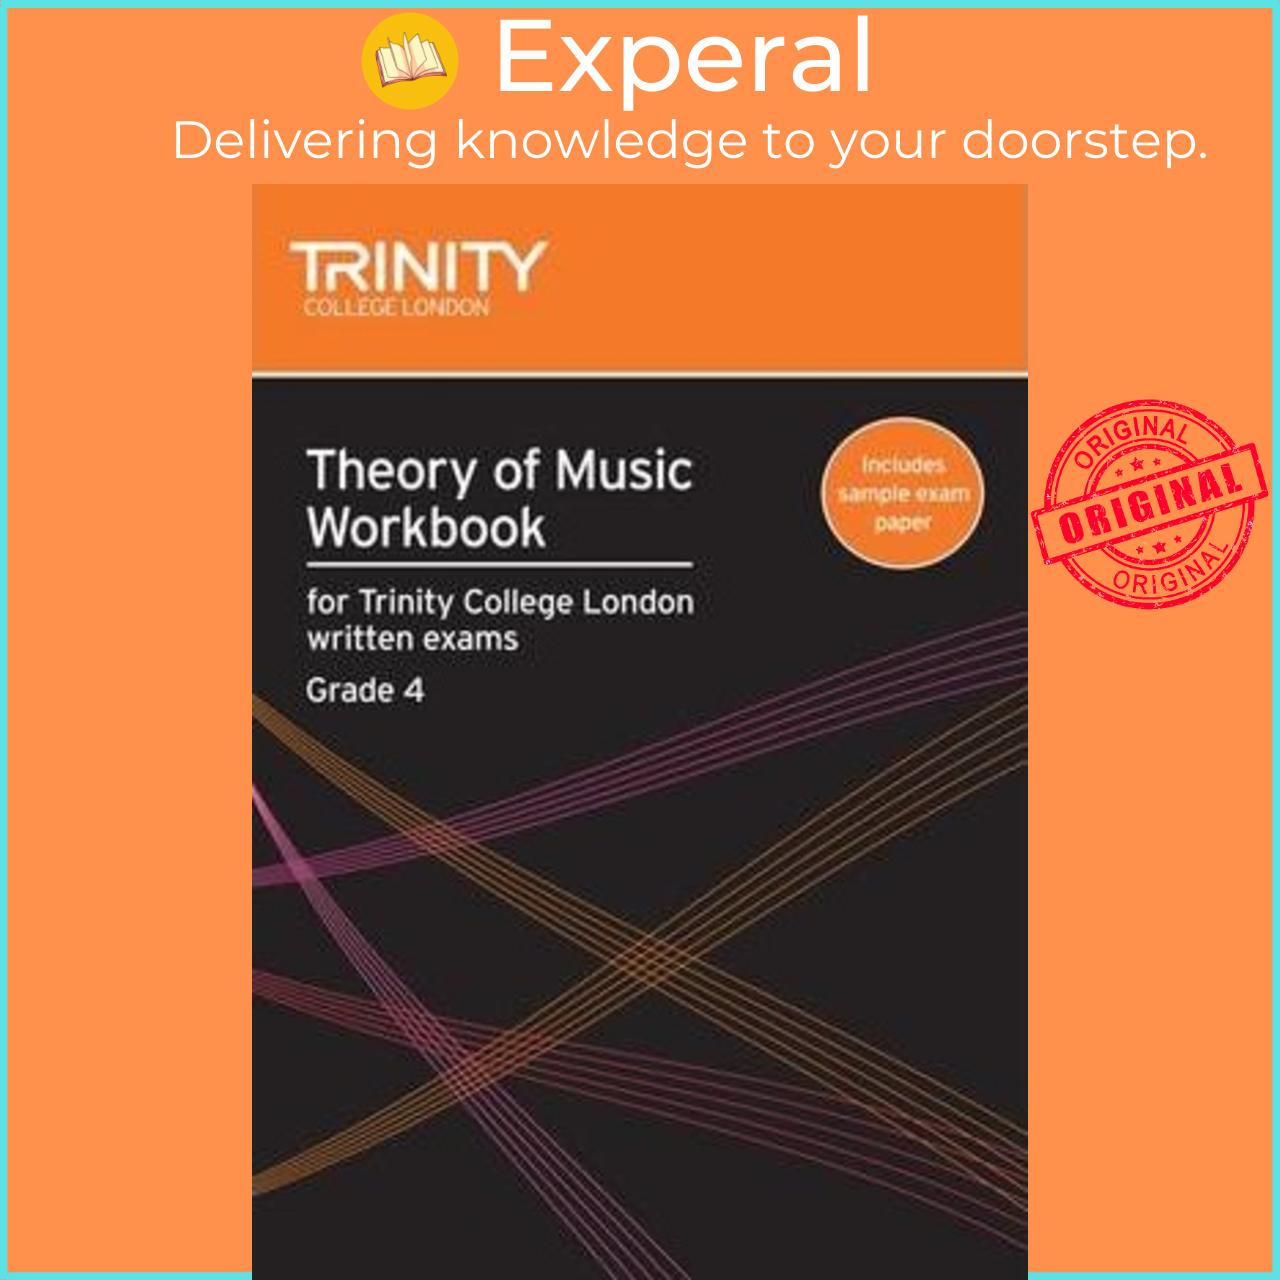 Sách - Theory of Music Workbook Grade 4 (2007) by Trinity College London (UK edition, paperback)